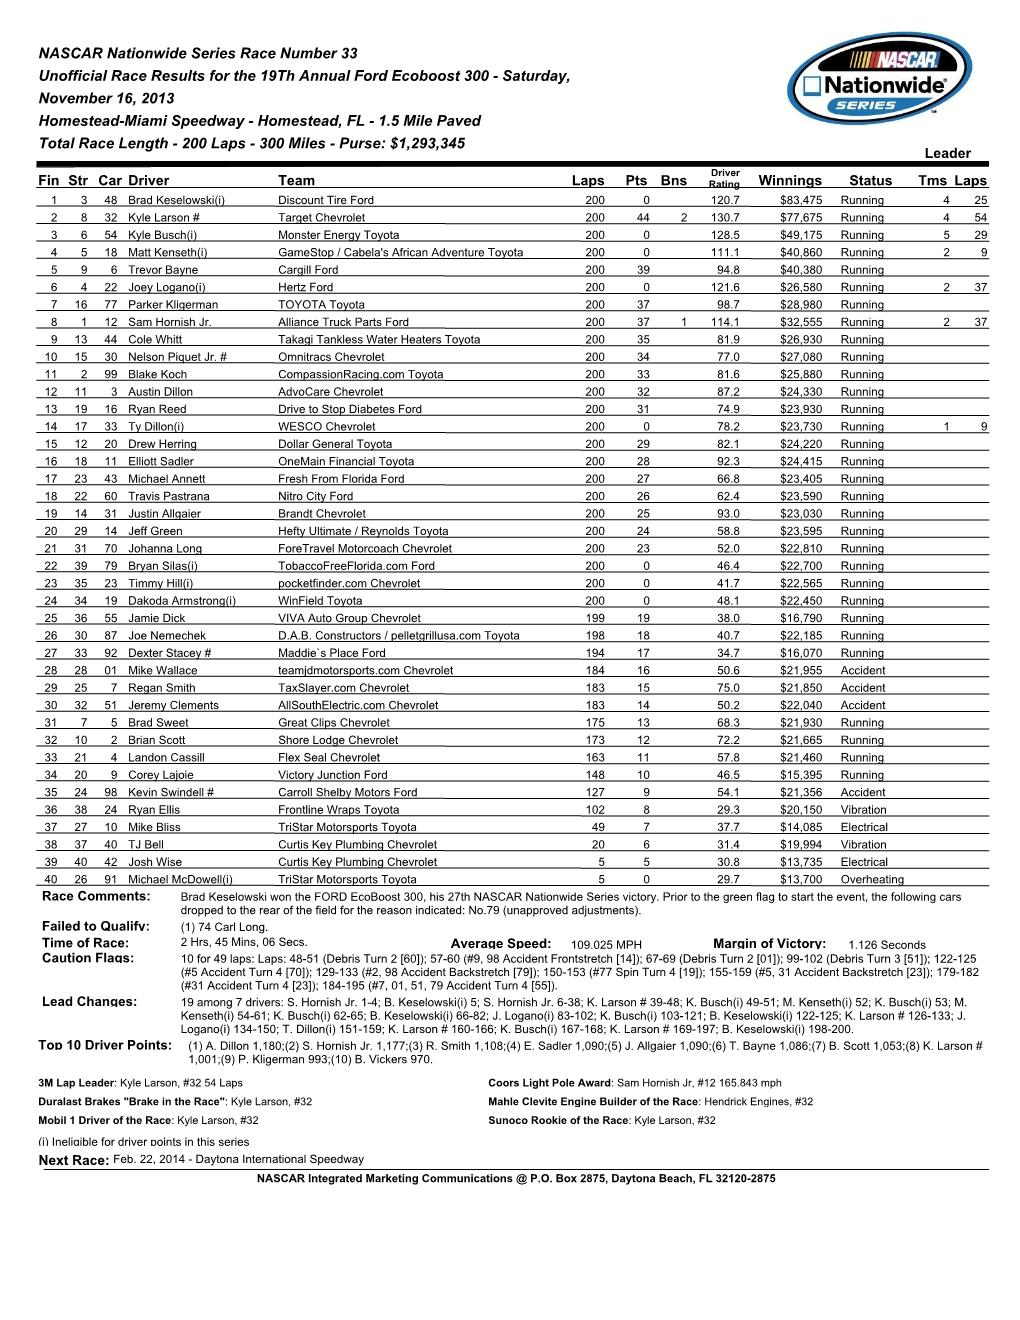 NASCAR Nationwide Series Race Number 33 Unofficial Race Results